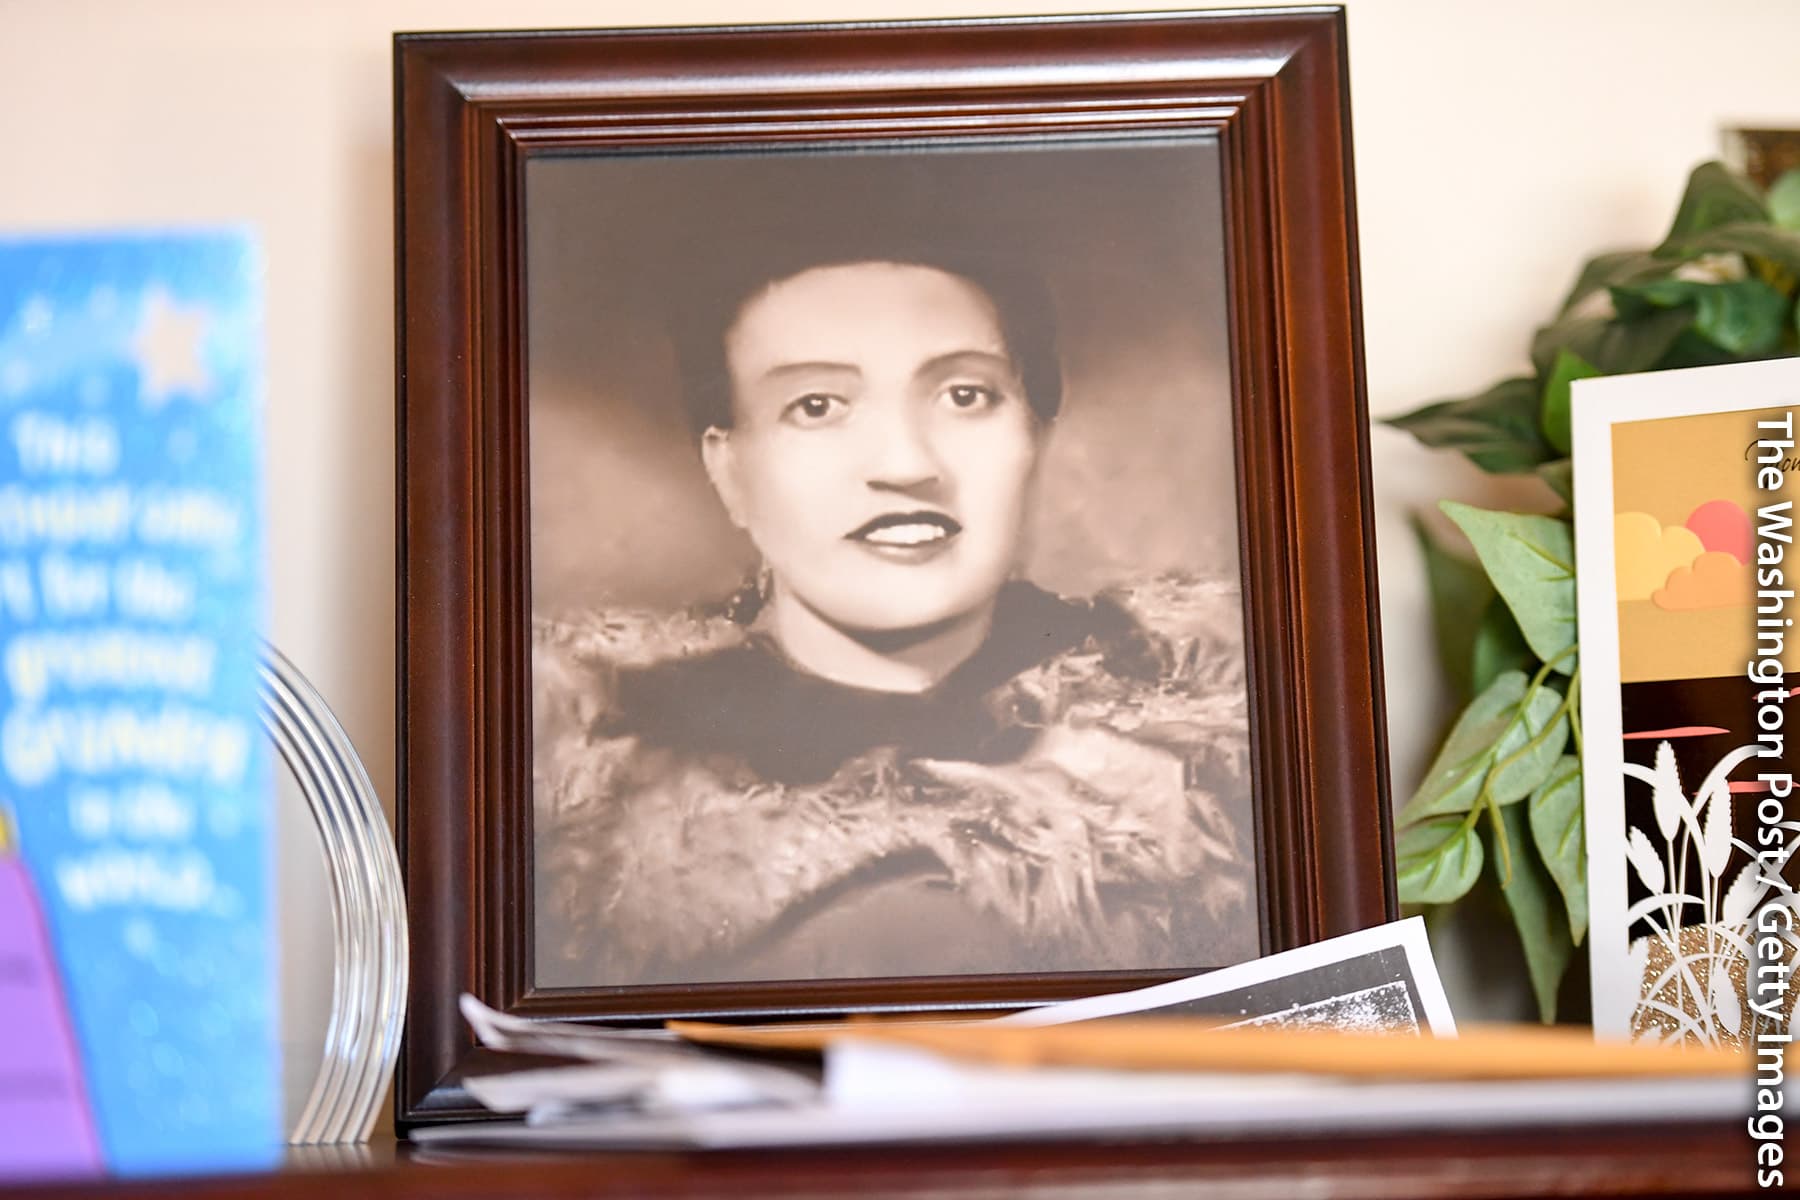 WHO Honors Henrietta Lacks as Family Pursues Justice